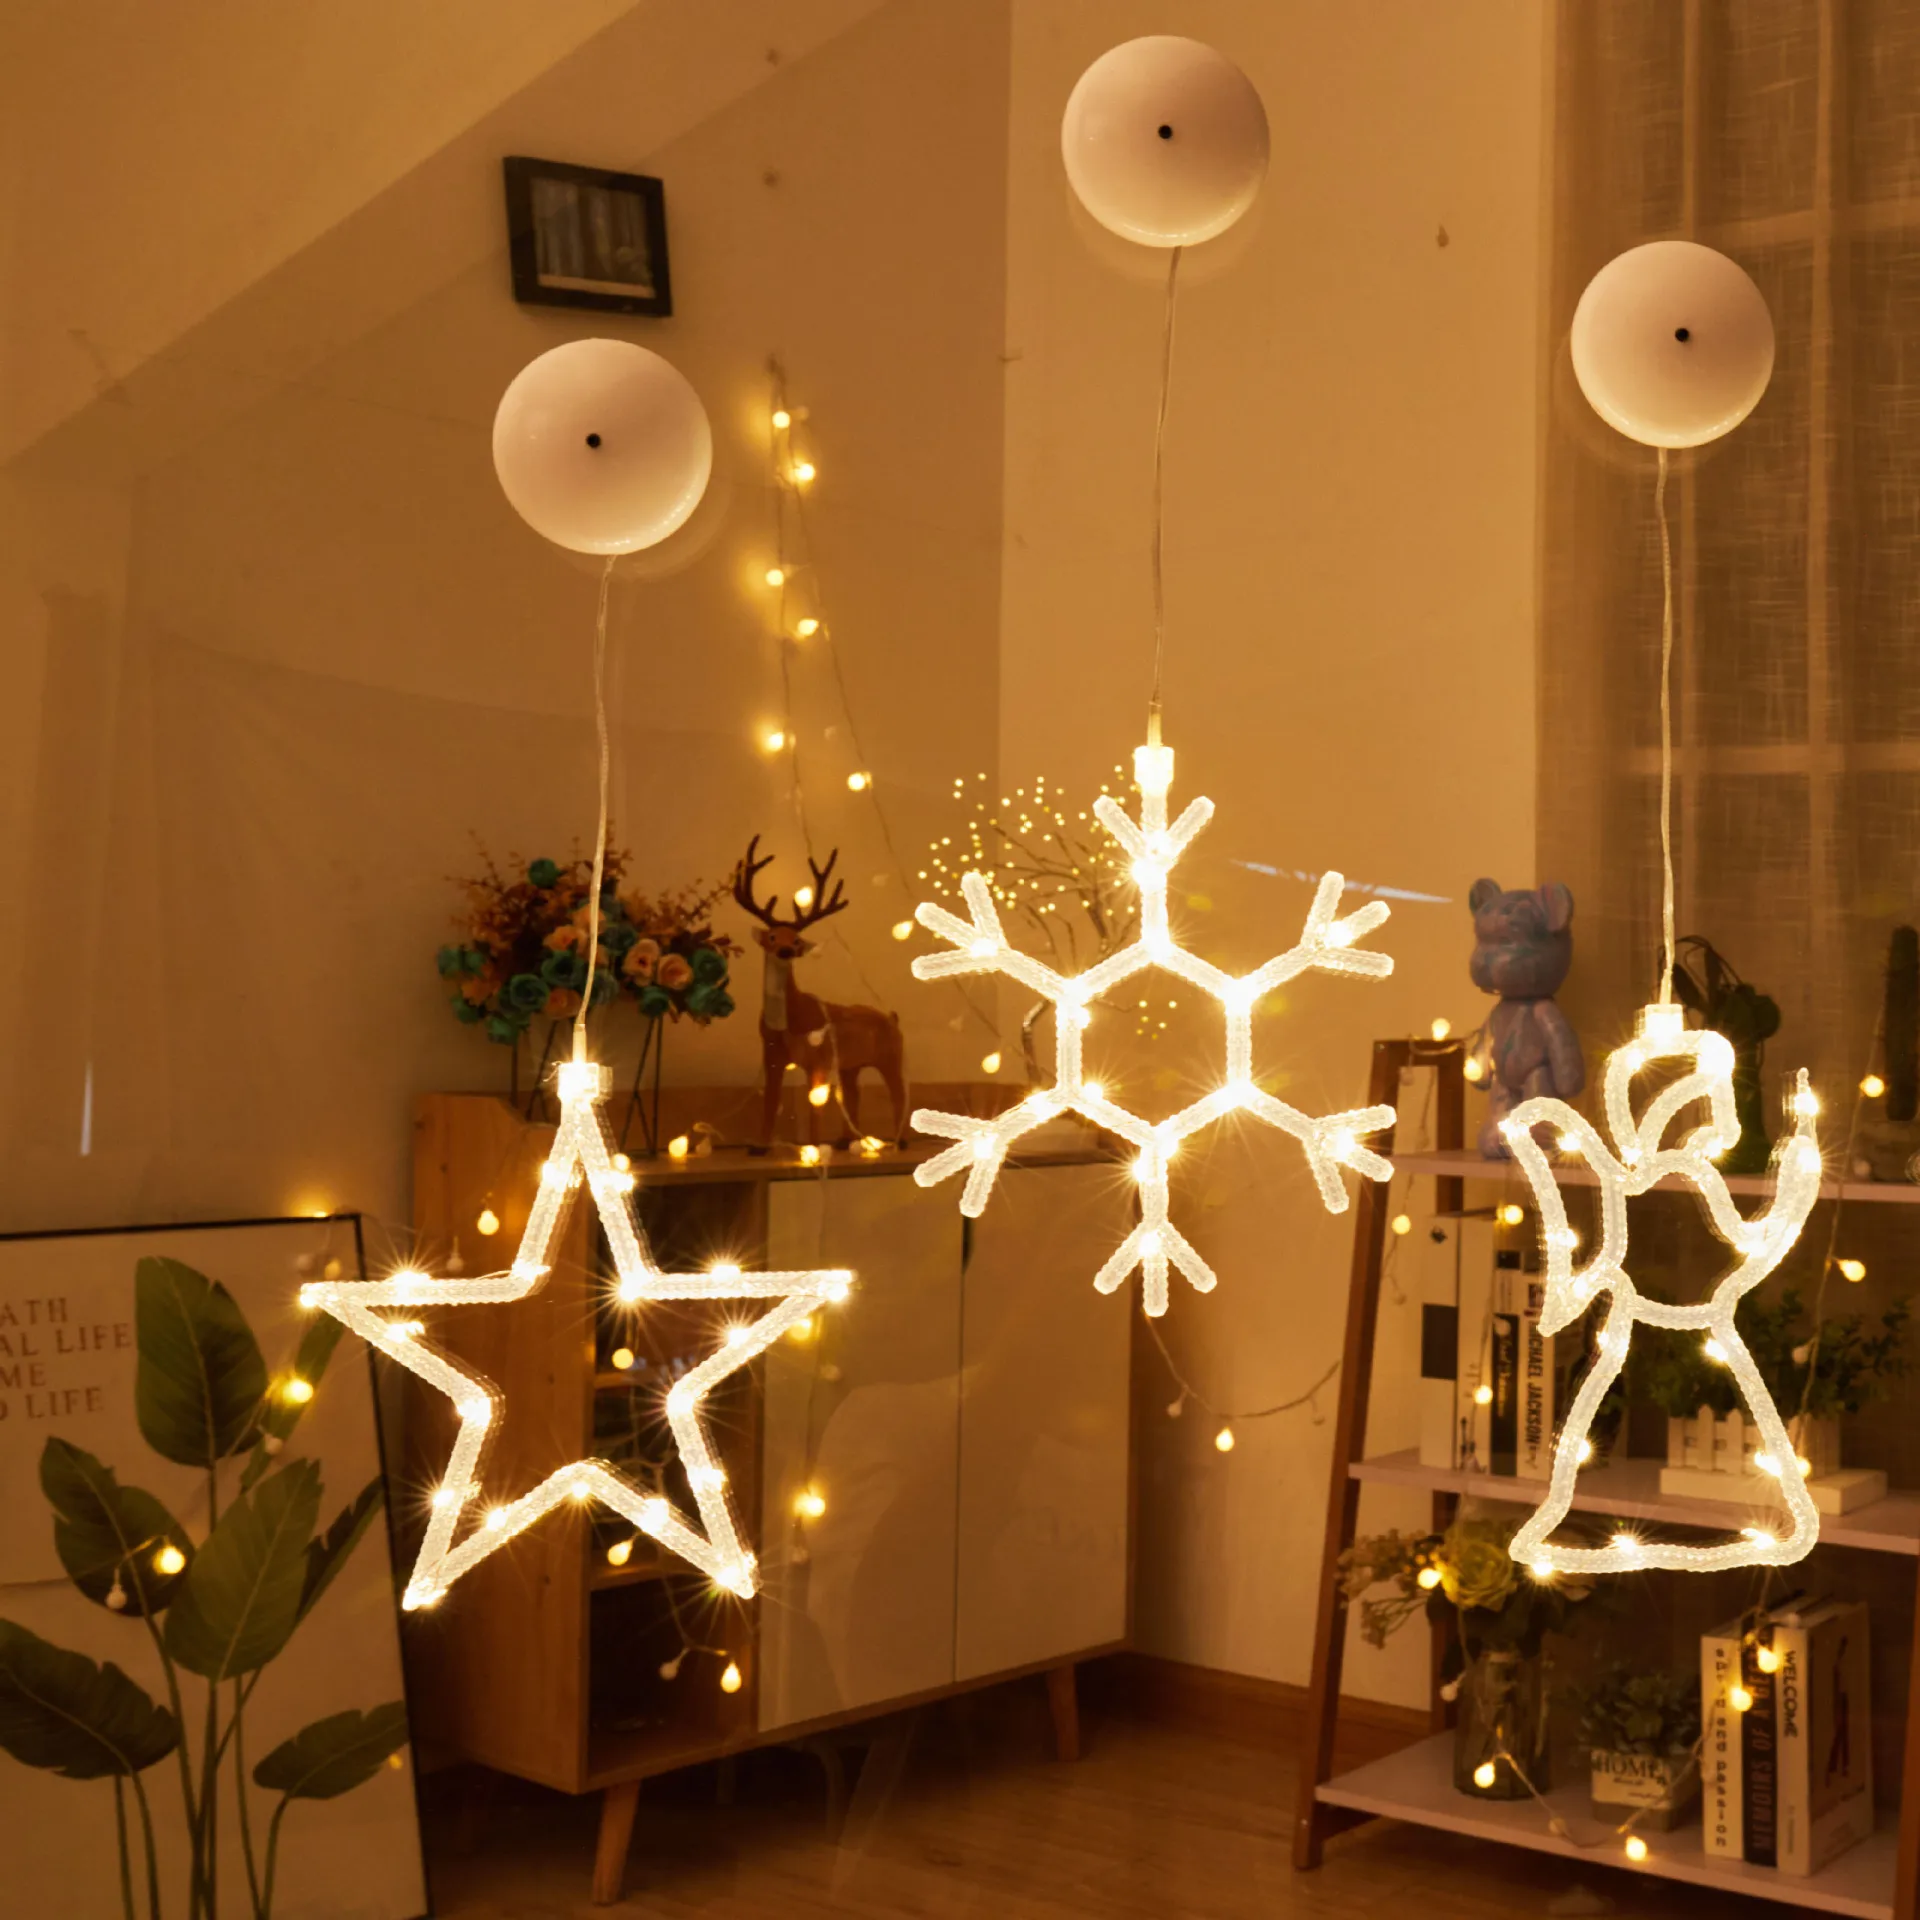 1PC LED Curtain Snowflake String Lights Indoor&Outdoor Wave Lighting Christmas Decorations New Year's Decoration Holiday Party